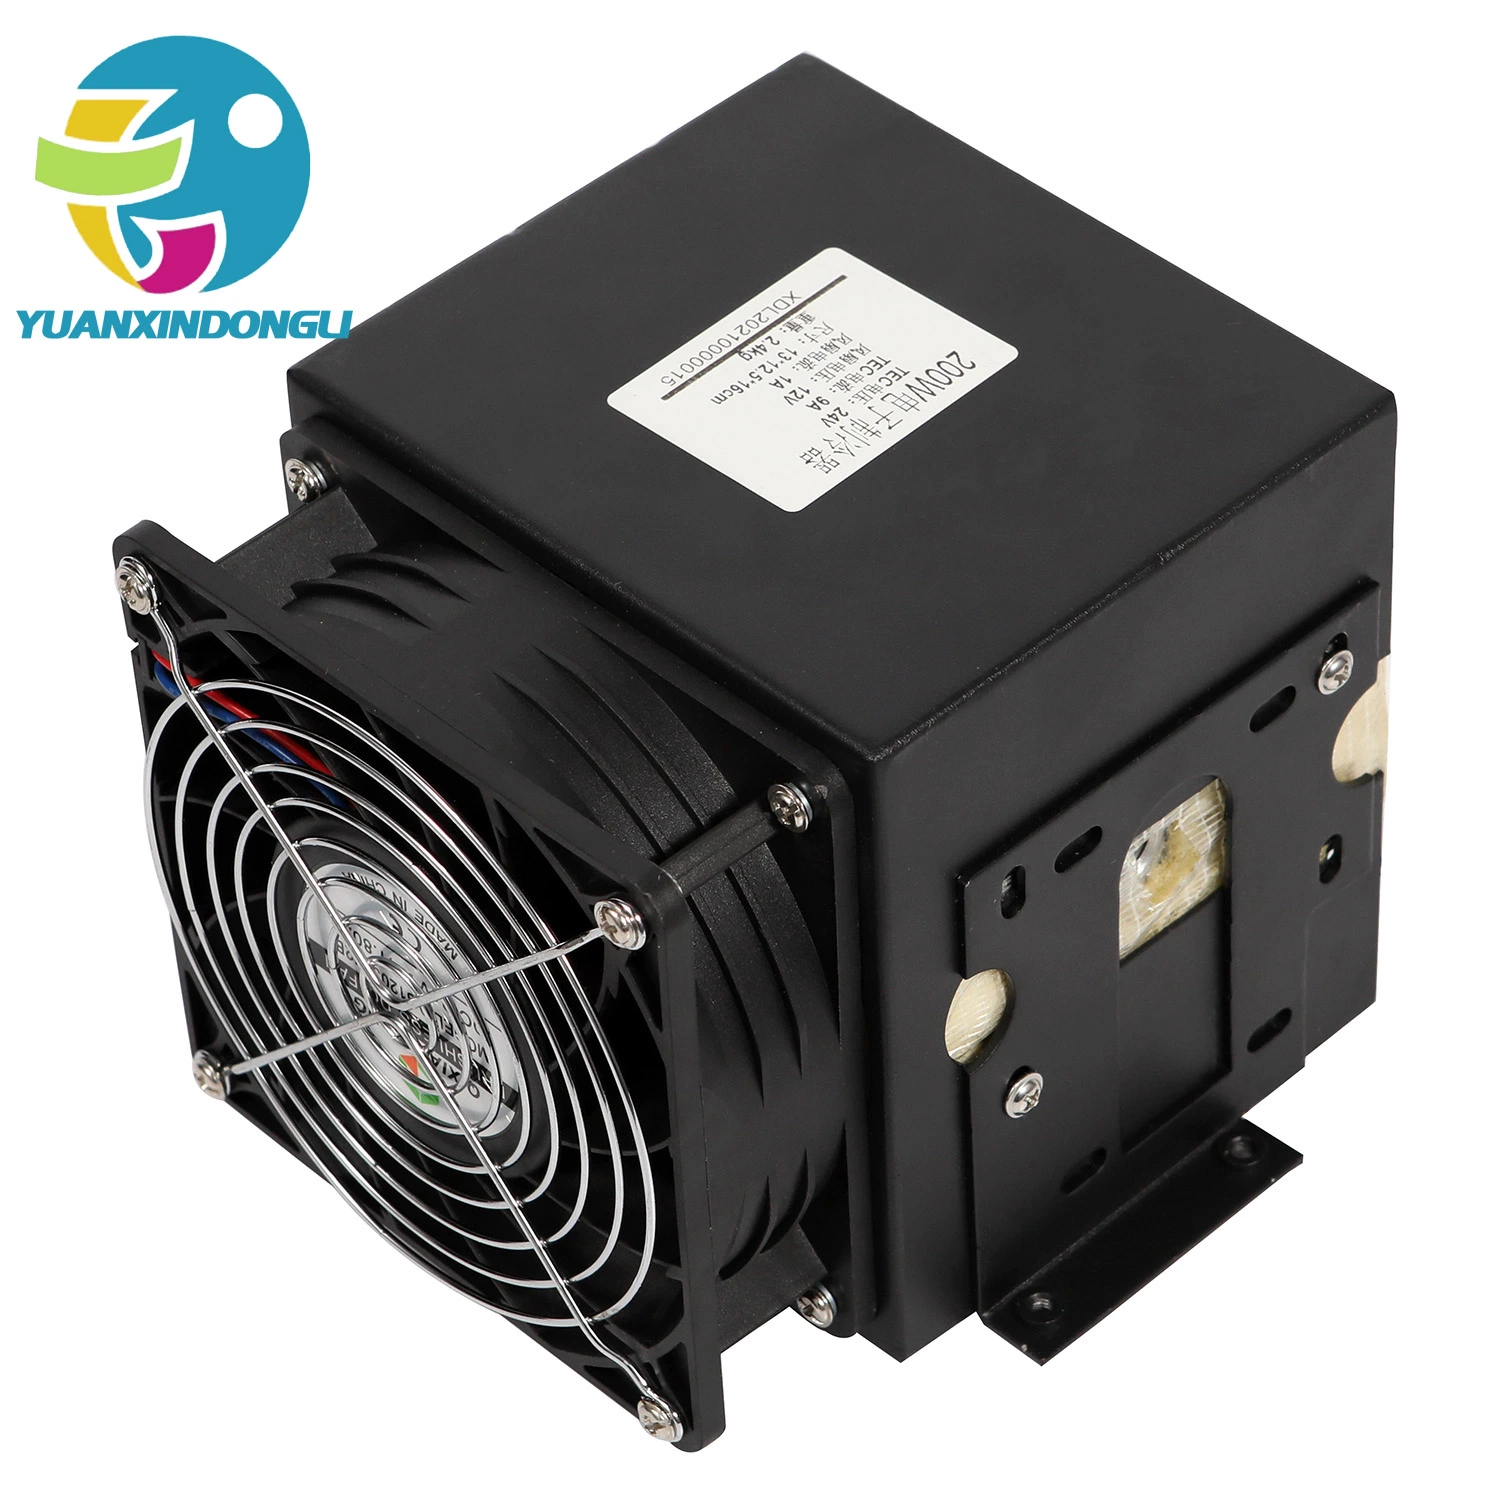 200W Cooler for IPL Beauty Equipment with OEM